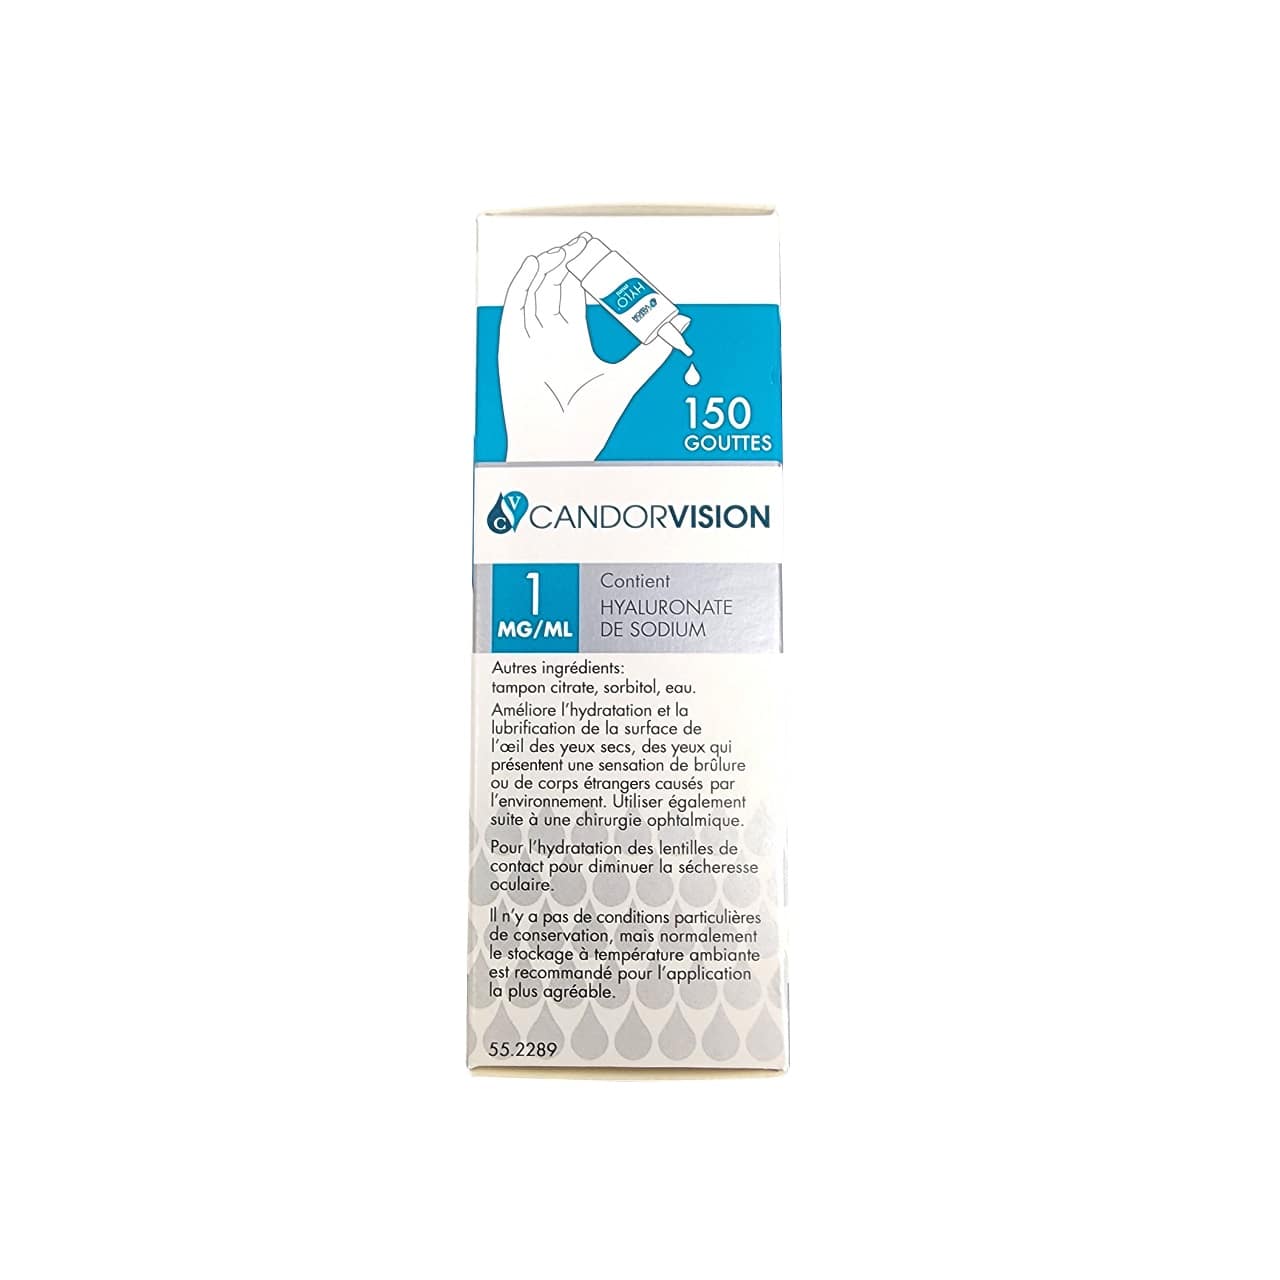 Ingredients for CandorVision Hylo Lubricating Eye Drops mini (5 mL) in French